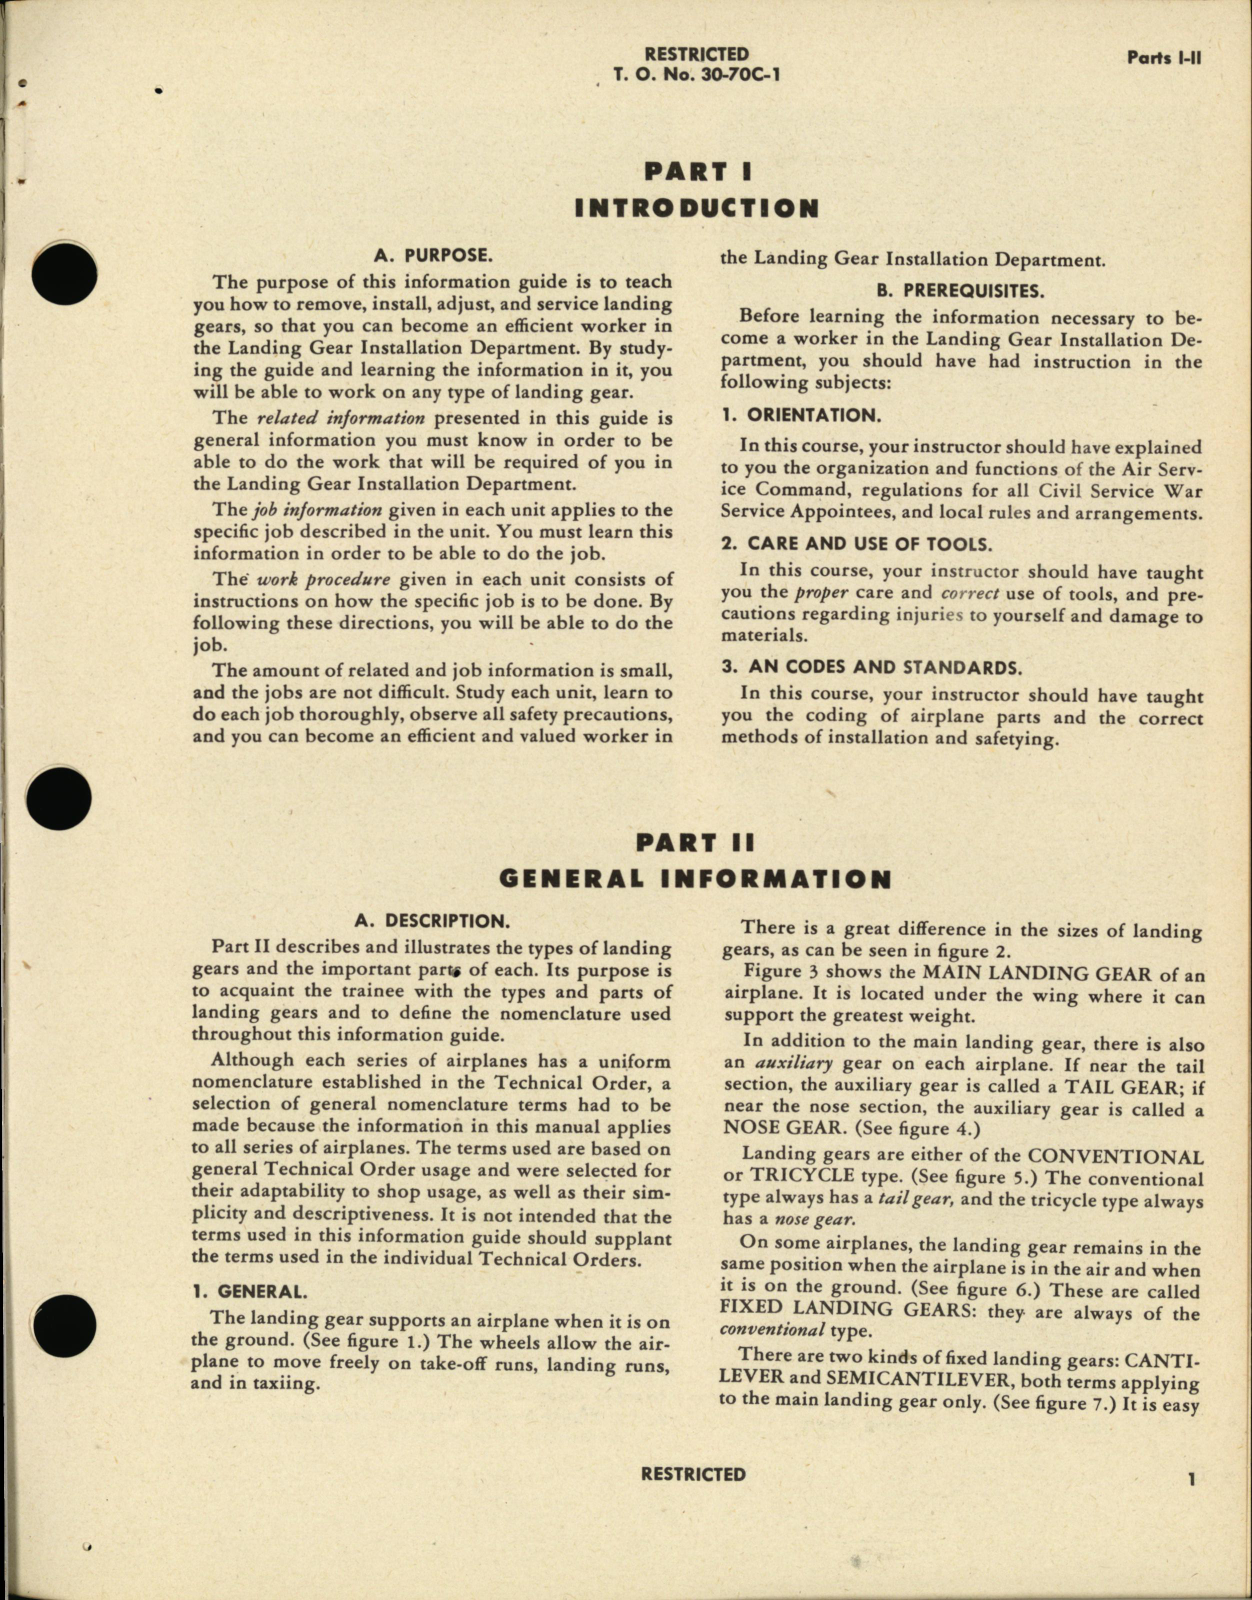 Sample page 5 from AirCorps Library document: Information Guide for Landing Gear Installation